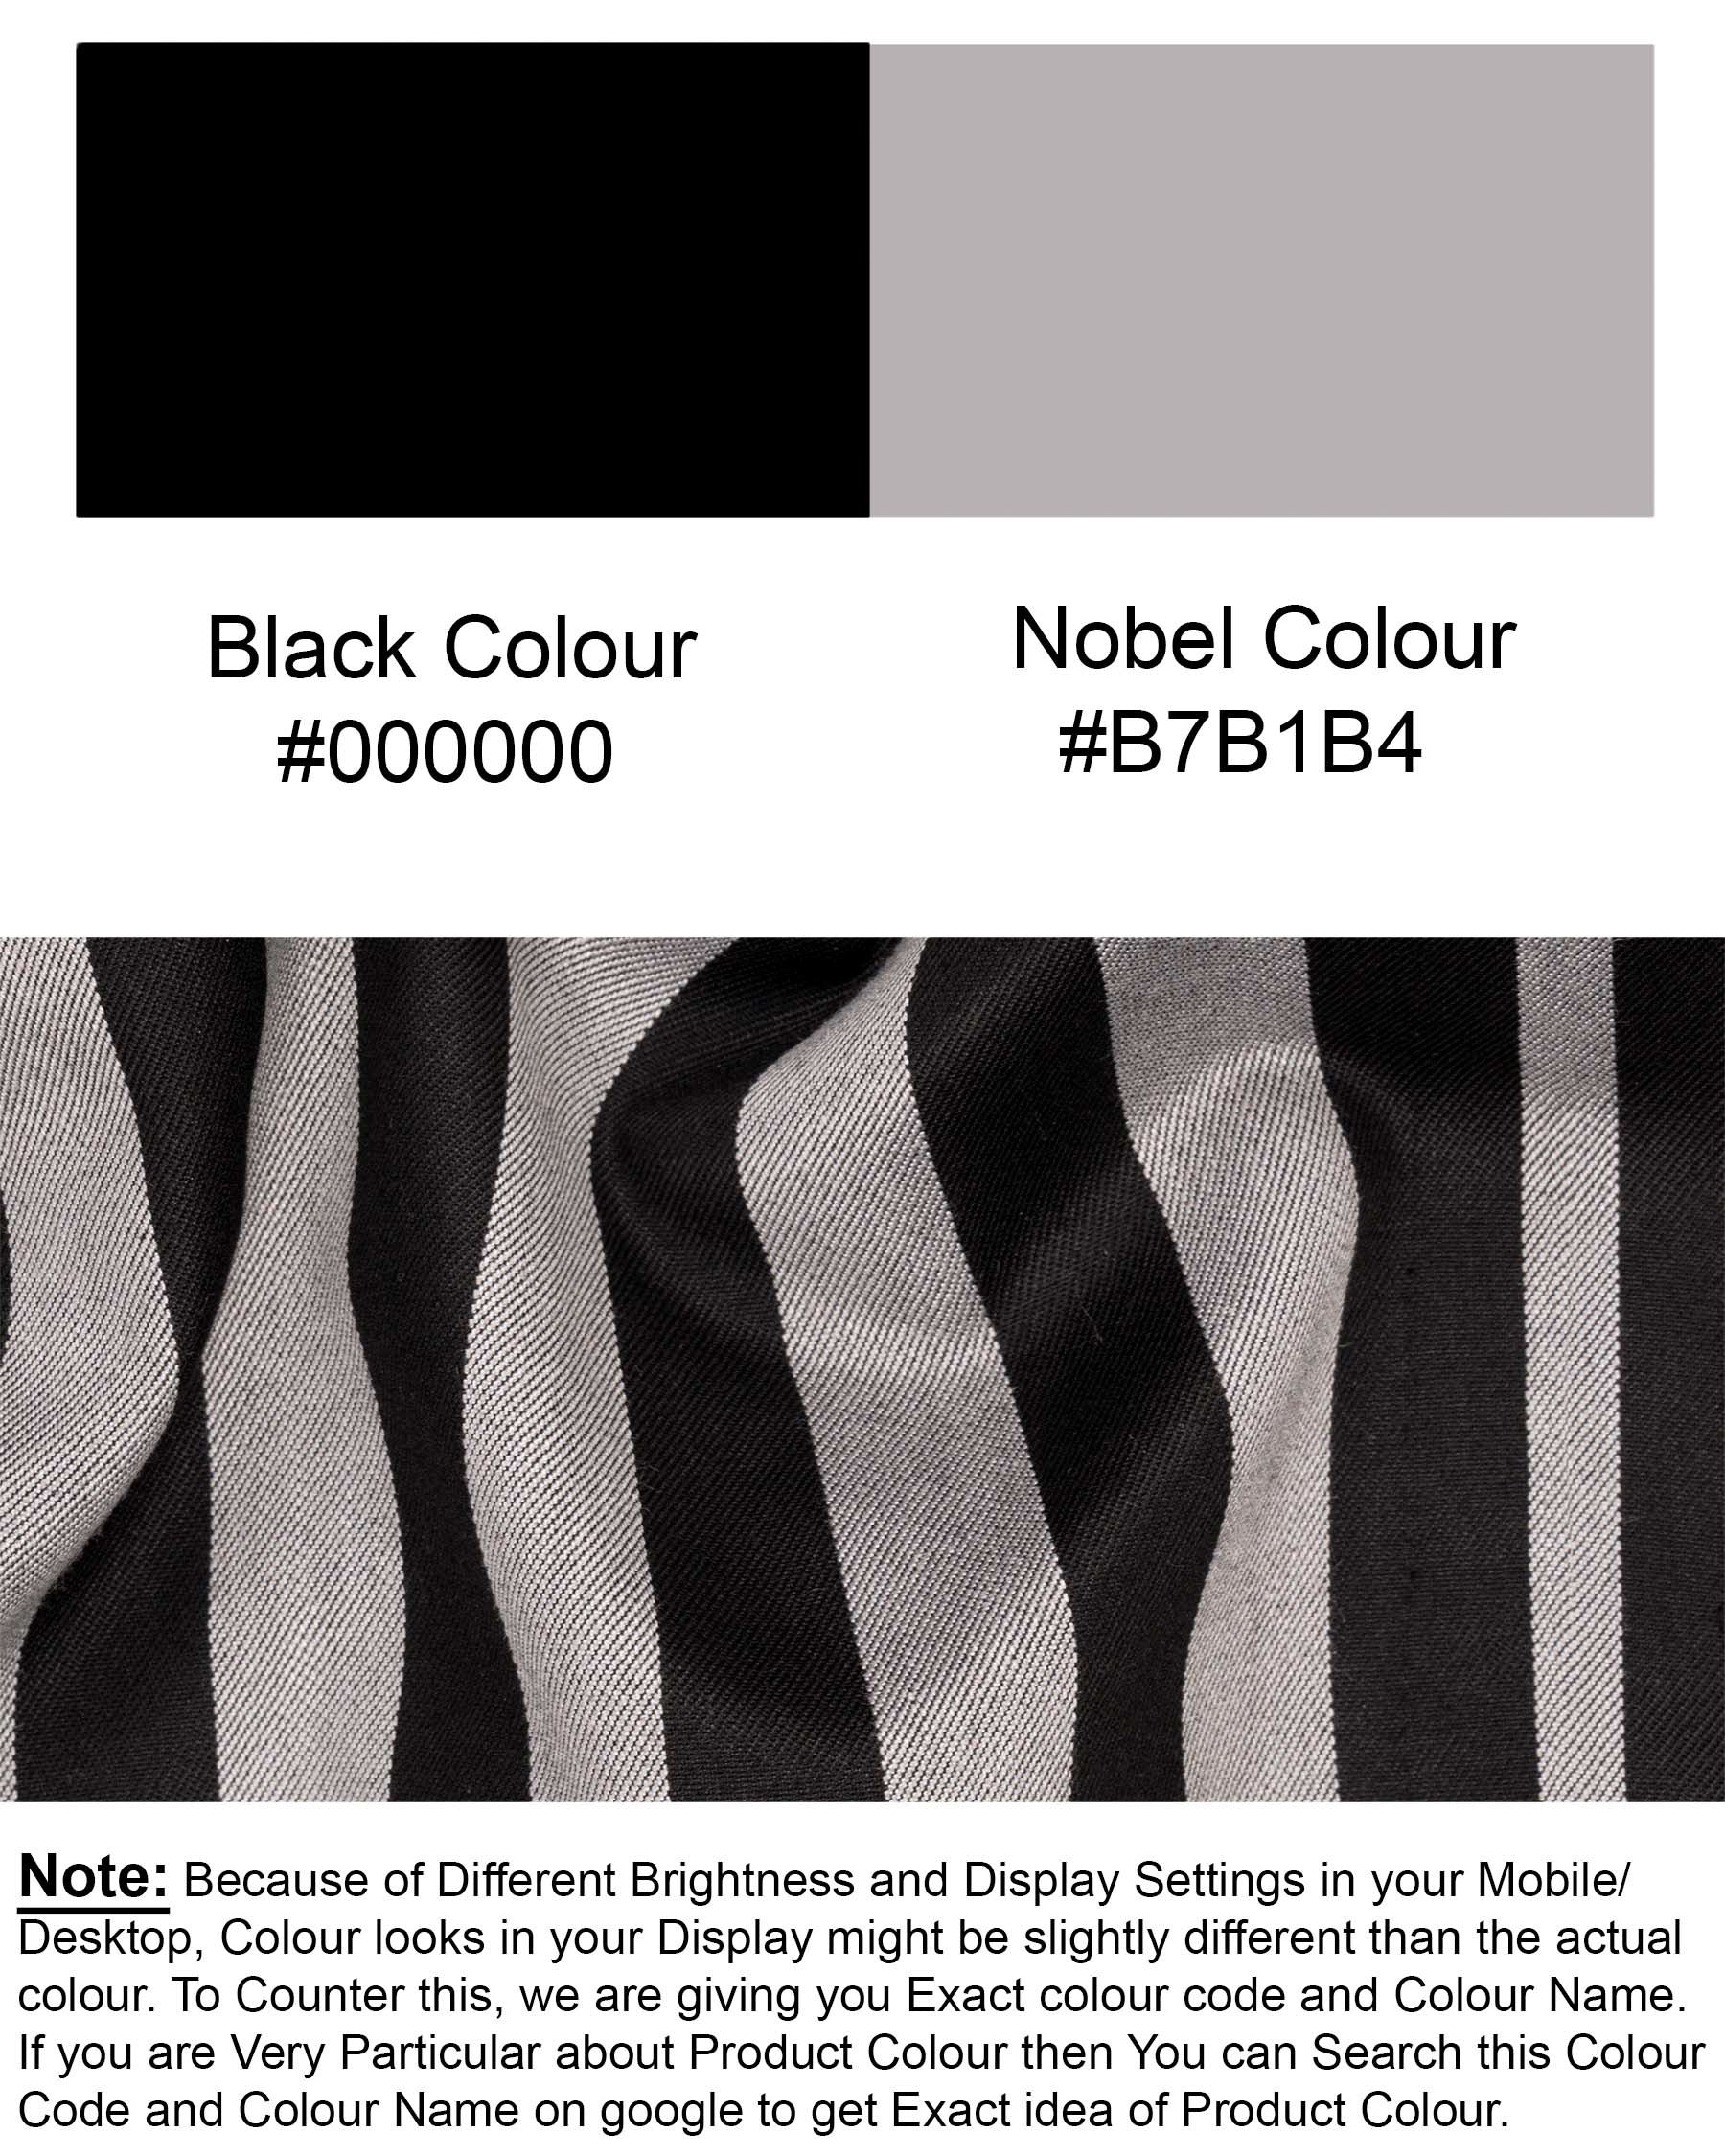 Nobel Grey with Black Striped Double Breasted Suit ST1781-DB-GB-36, ST1781-DB-GB-38, ST1781-DB-GB-40, ST1781-DB-GB-42, ST1781-DB-GB-44, ST1781-DB-GB-46, ST1781-DB-GB-48, ST1781-DB-GB-50, ST1781-DB-GB-52, ST1781-DB-GB-54, ST1781-DB-GB-56, ST1781-DB-GB-58, ST1781-DB-GB-60